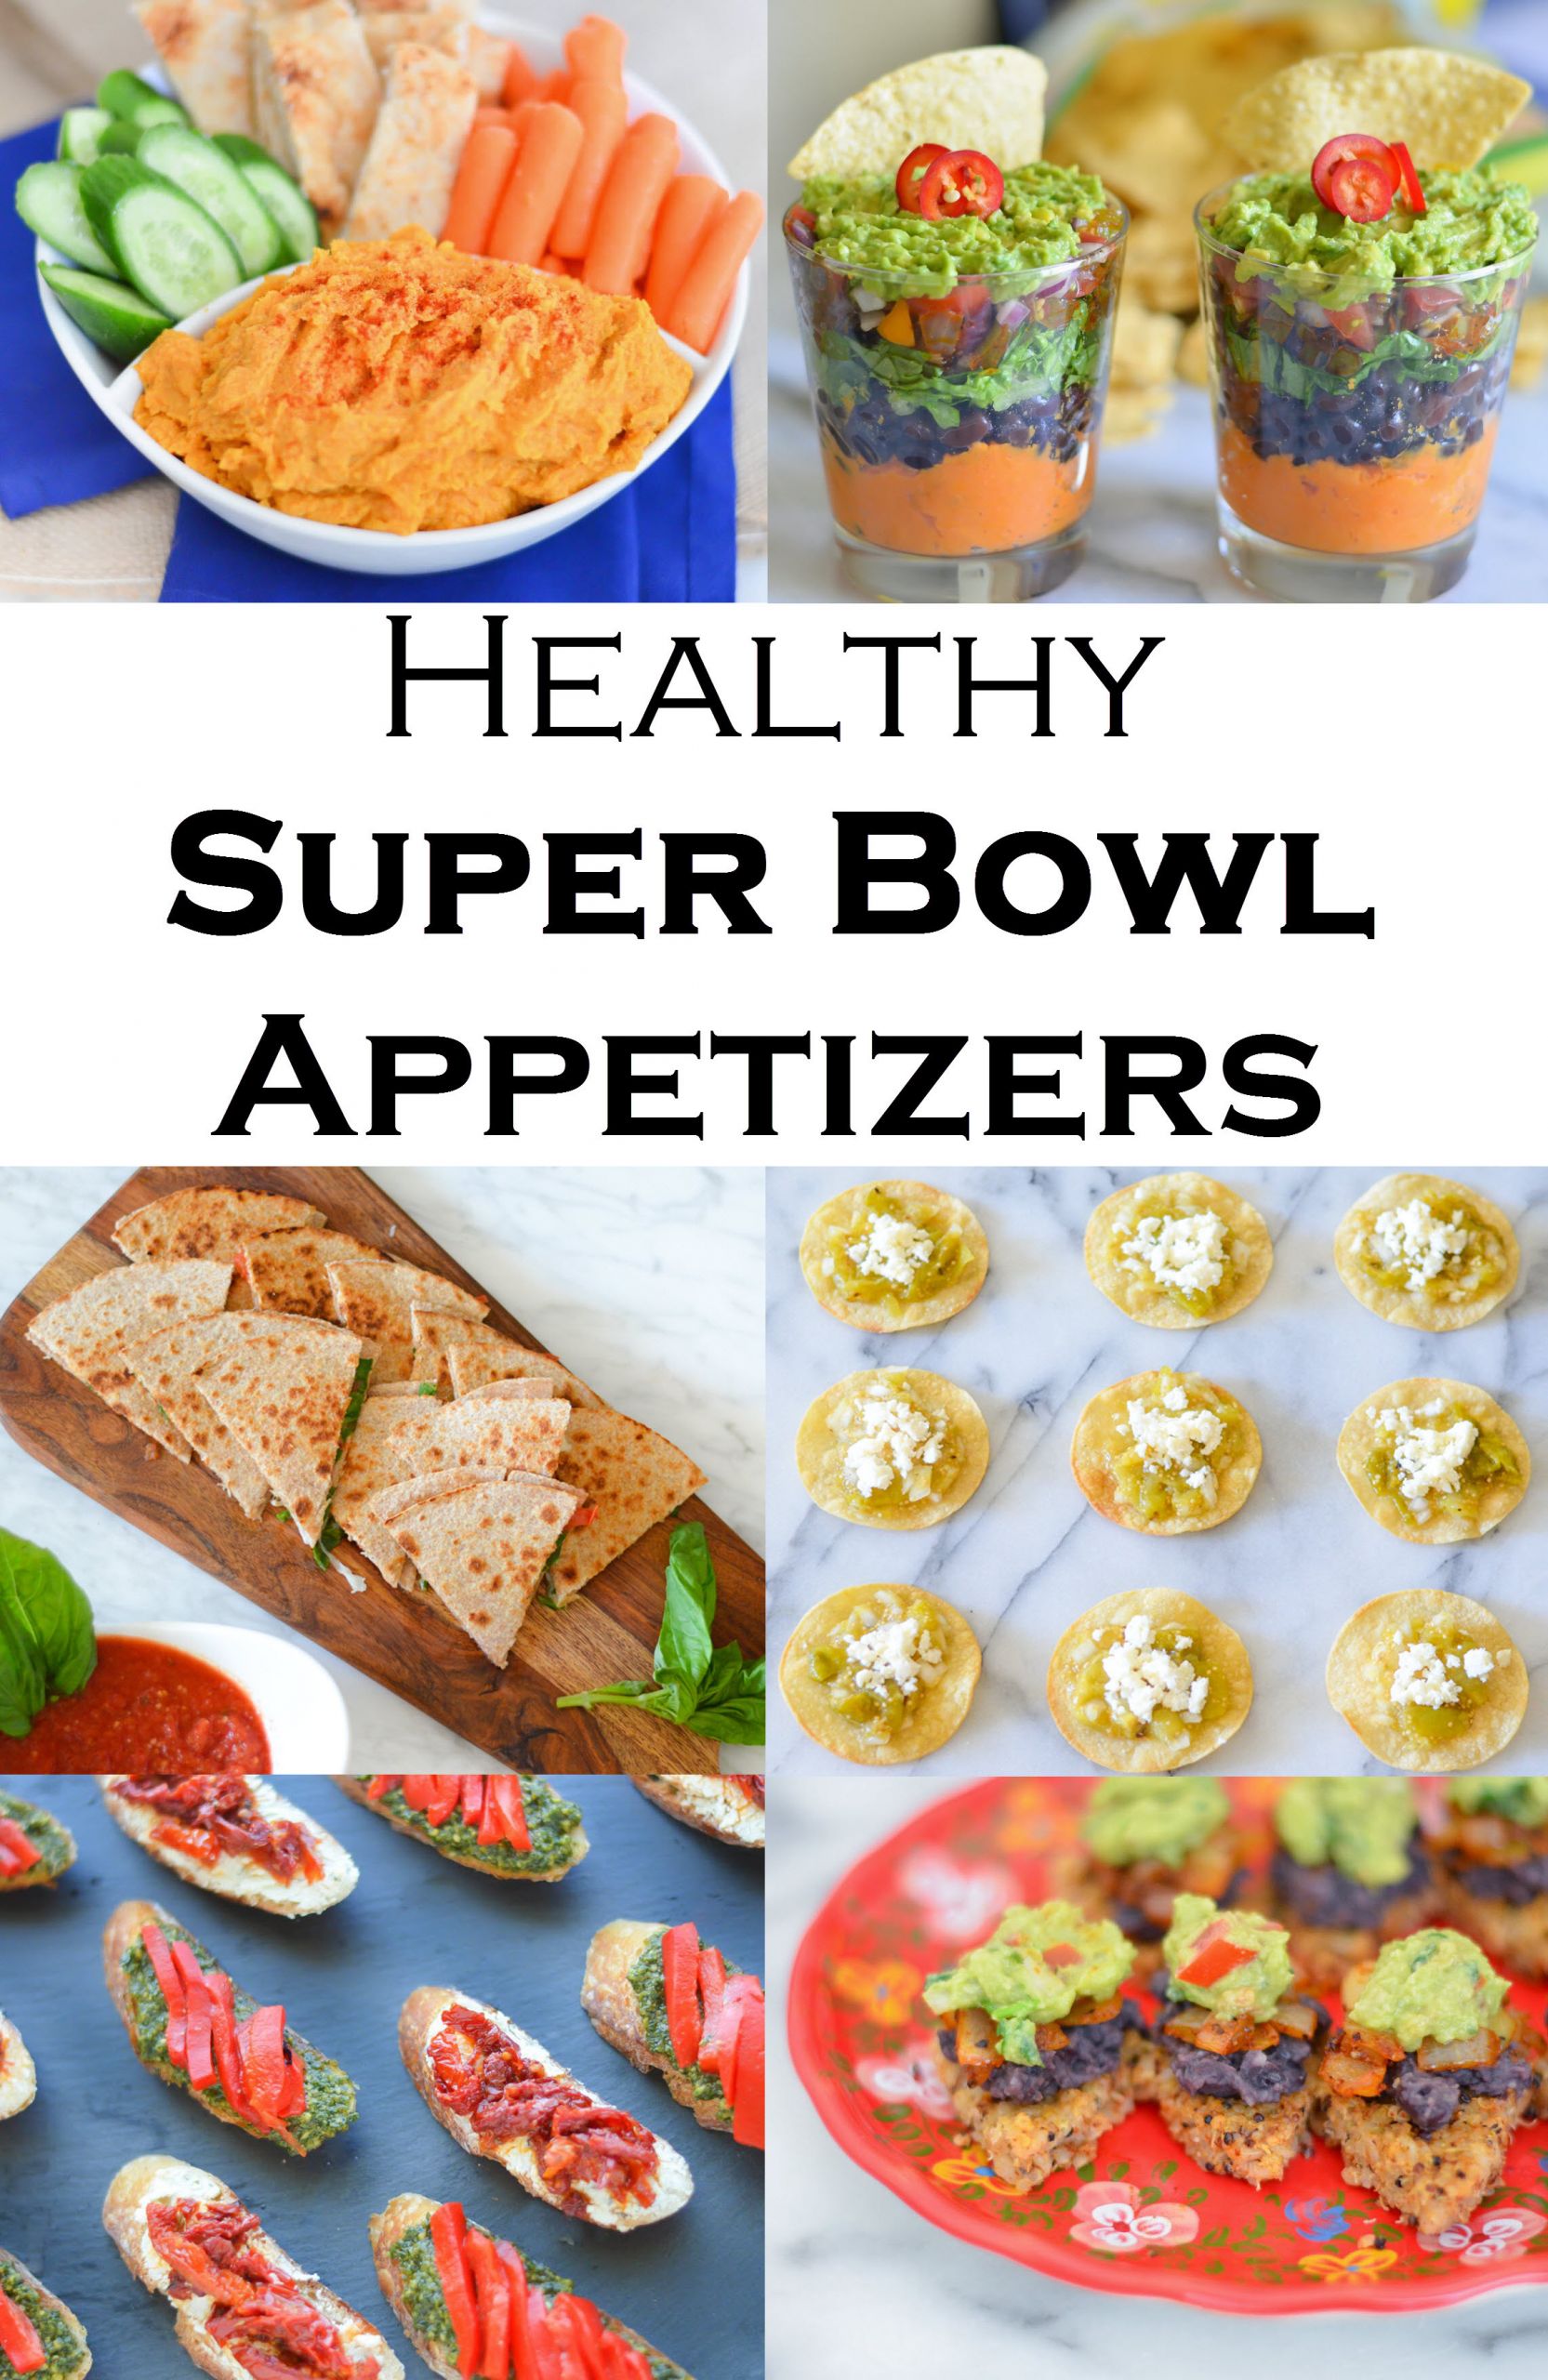 Recipes For Super Bowl Appetizers
 Healthy Super Bowl Recipes For Everyone